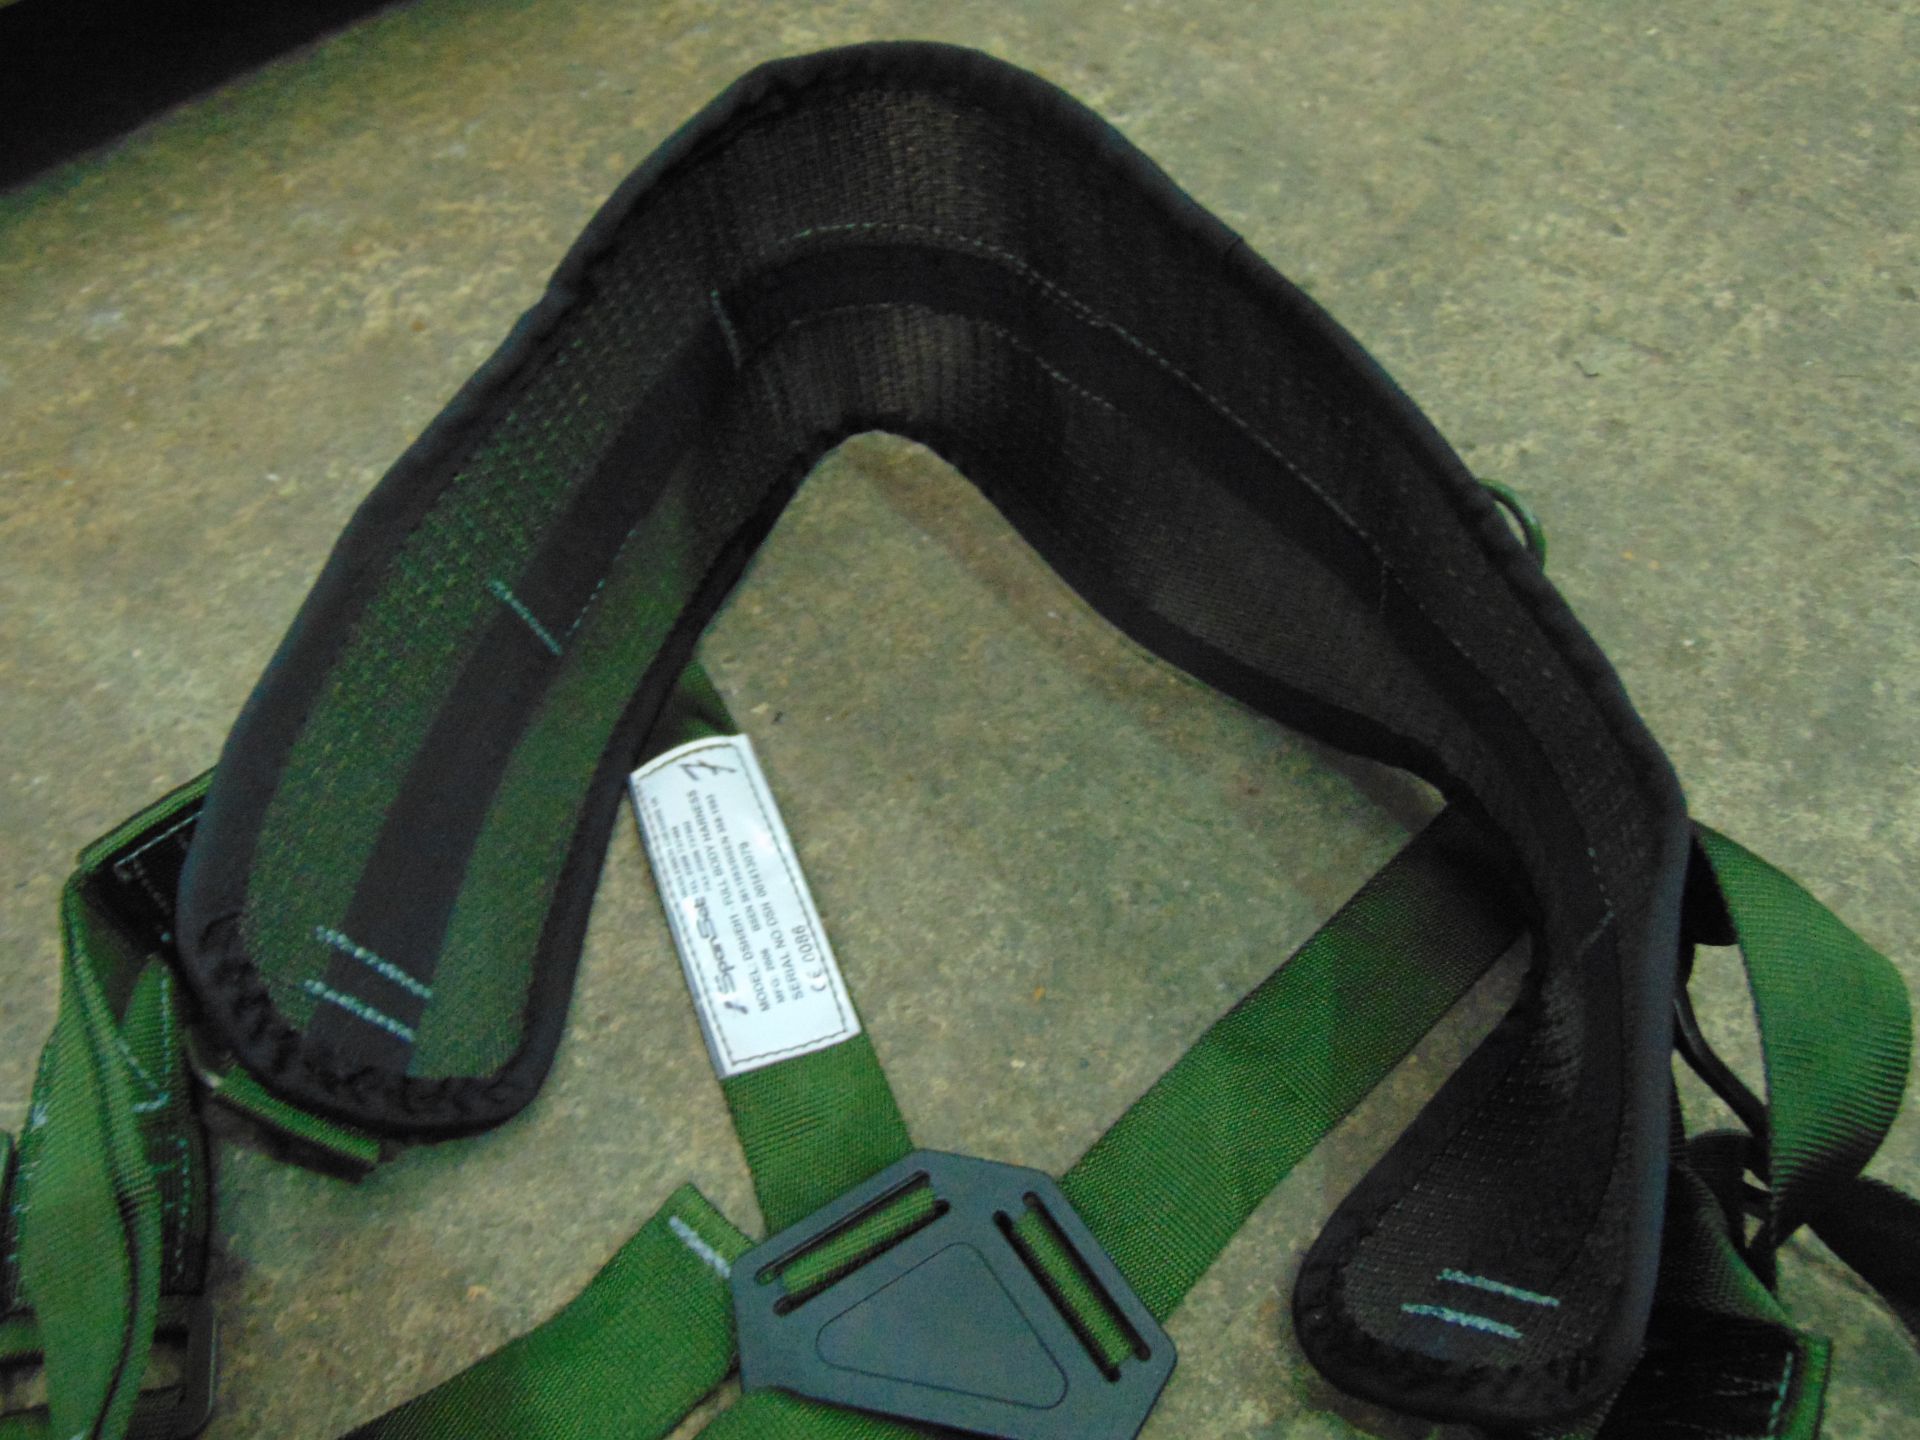 Spanset Full Body Harness with Work Position Lanyards etc - Image 15 of 24